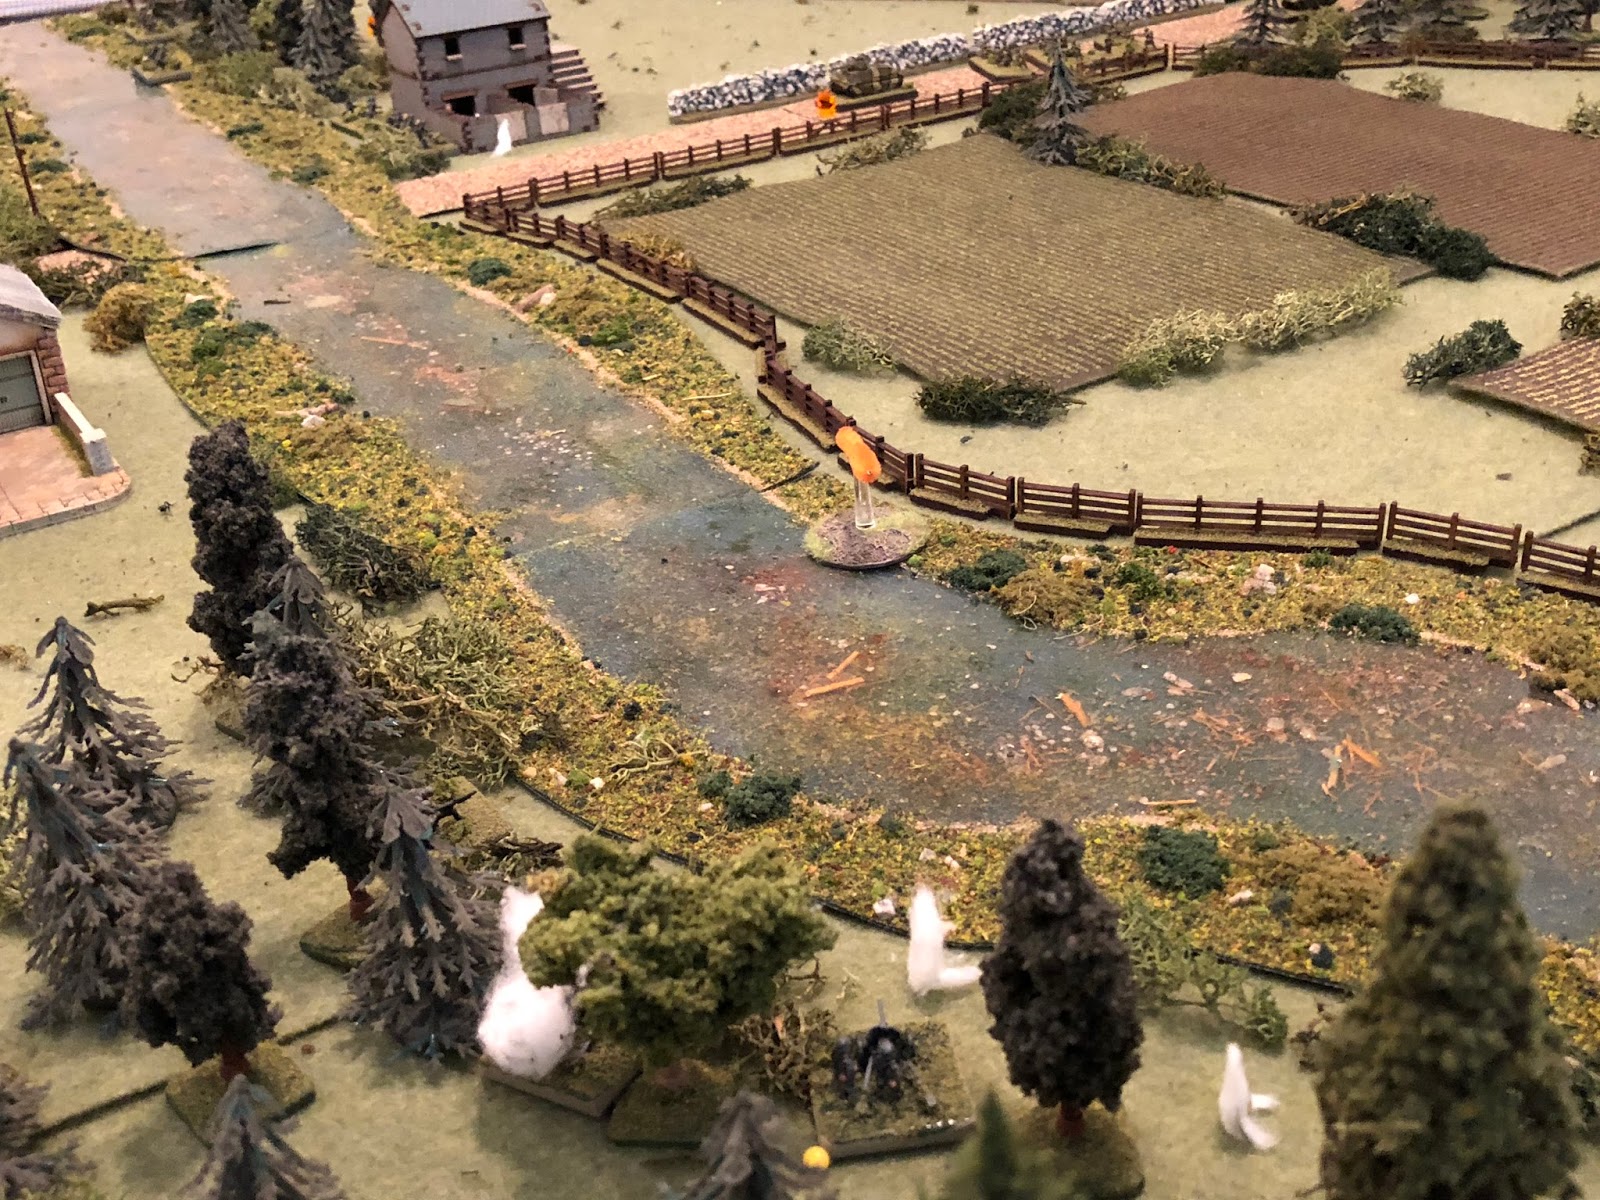  Sgt Kallenbach (bottom enter), having knocked out one enemy Somua already, turns his 37mm ATG on the other (top center), currently leading the French 2nd Platoon east down main street.&nbsp; "Fire!"&nbsp; The stoic German gunners fire on the exposed